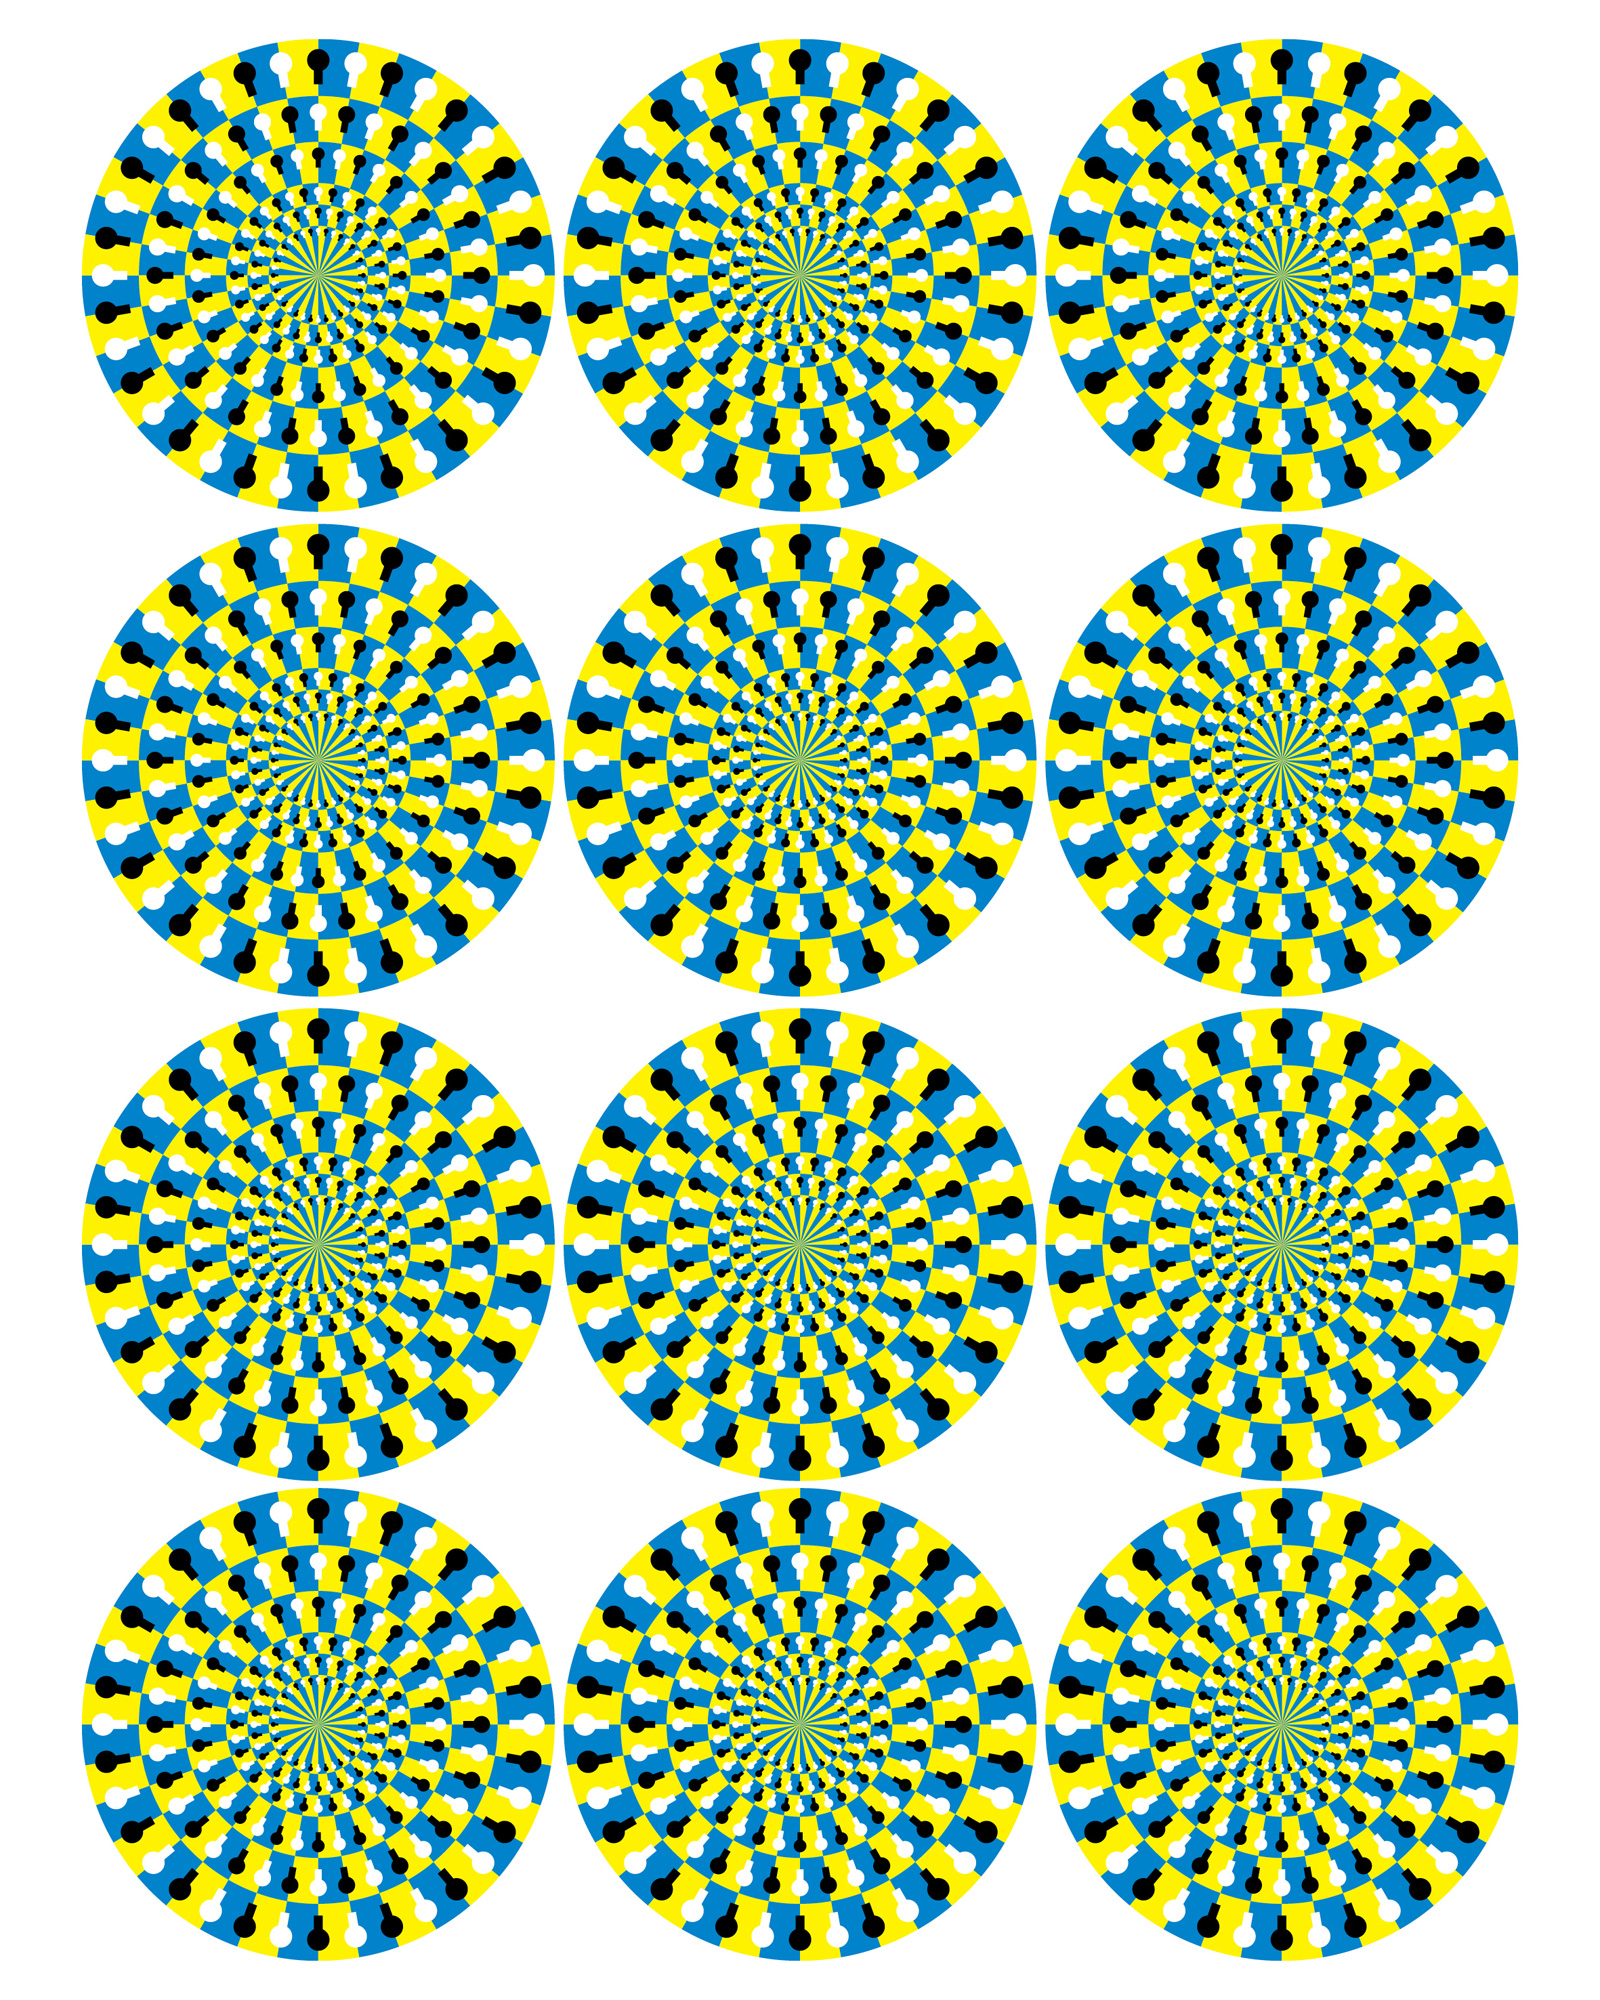 Twelve blue, black, yellow, and white pinwheels that produce an optical illusion of spinning.